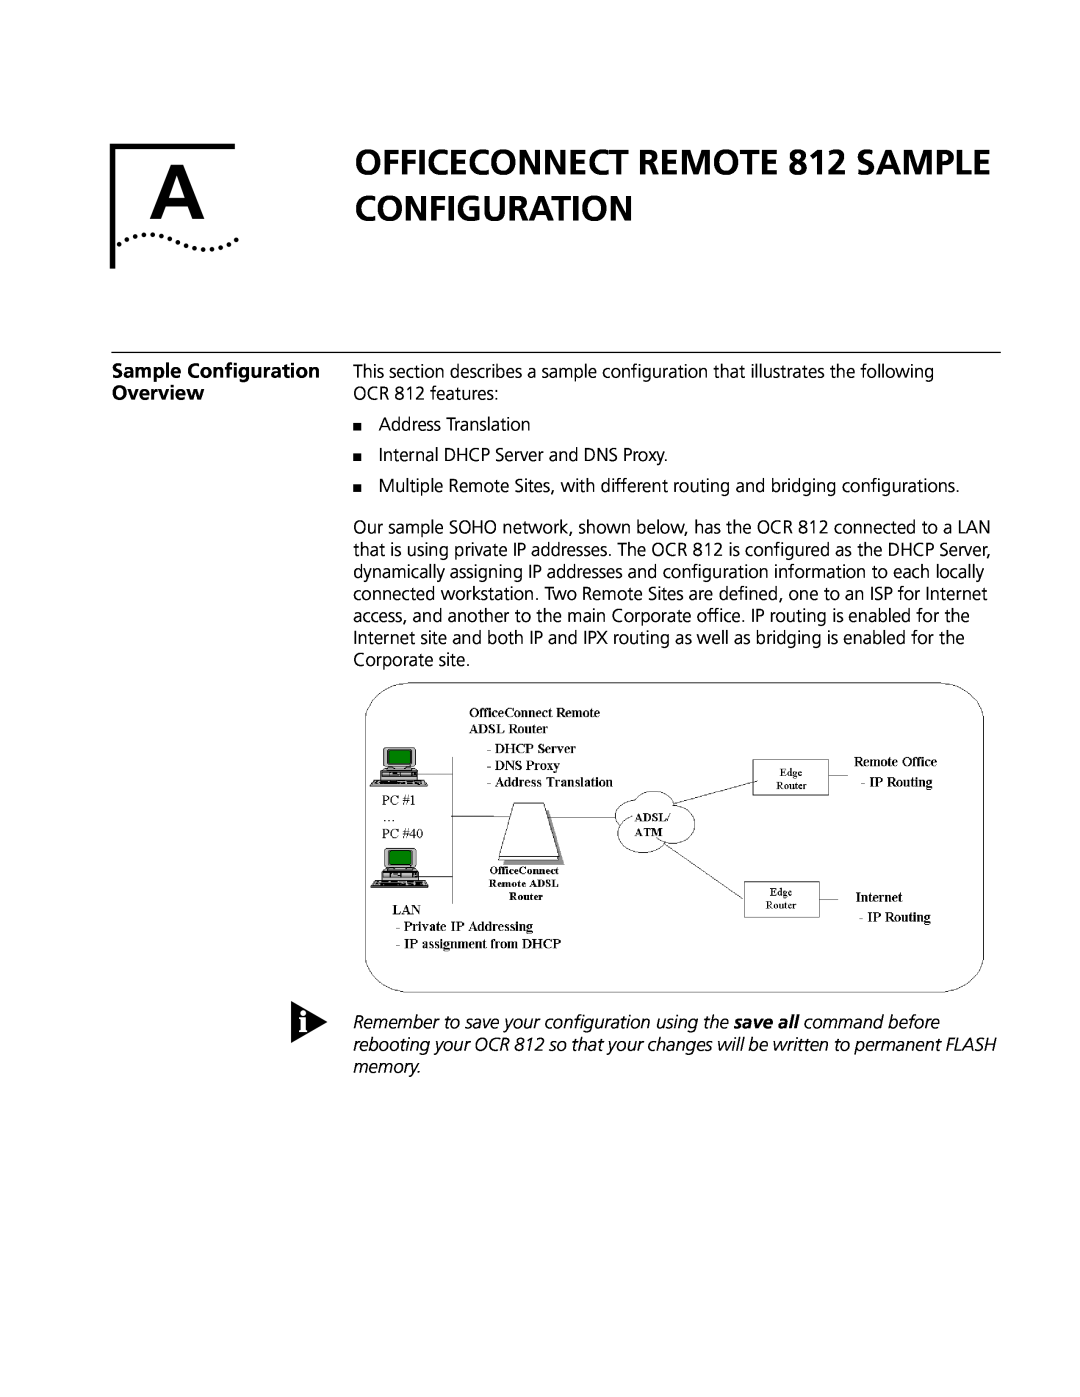 3Com OfficeConnect Remote 812 manual OFFICECONNECT REMOTE 812 SAMPLE A CONFIGURATION, Sample Configuration, Overview 